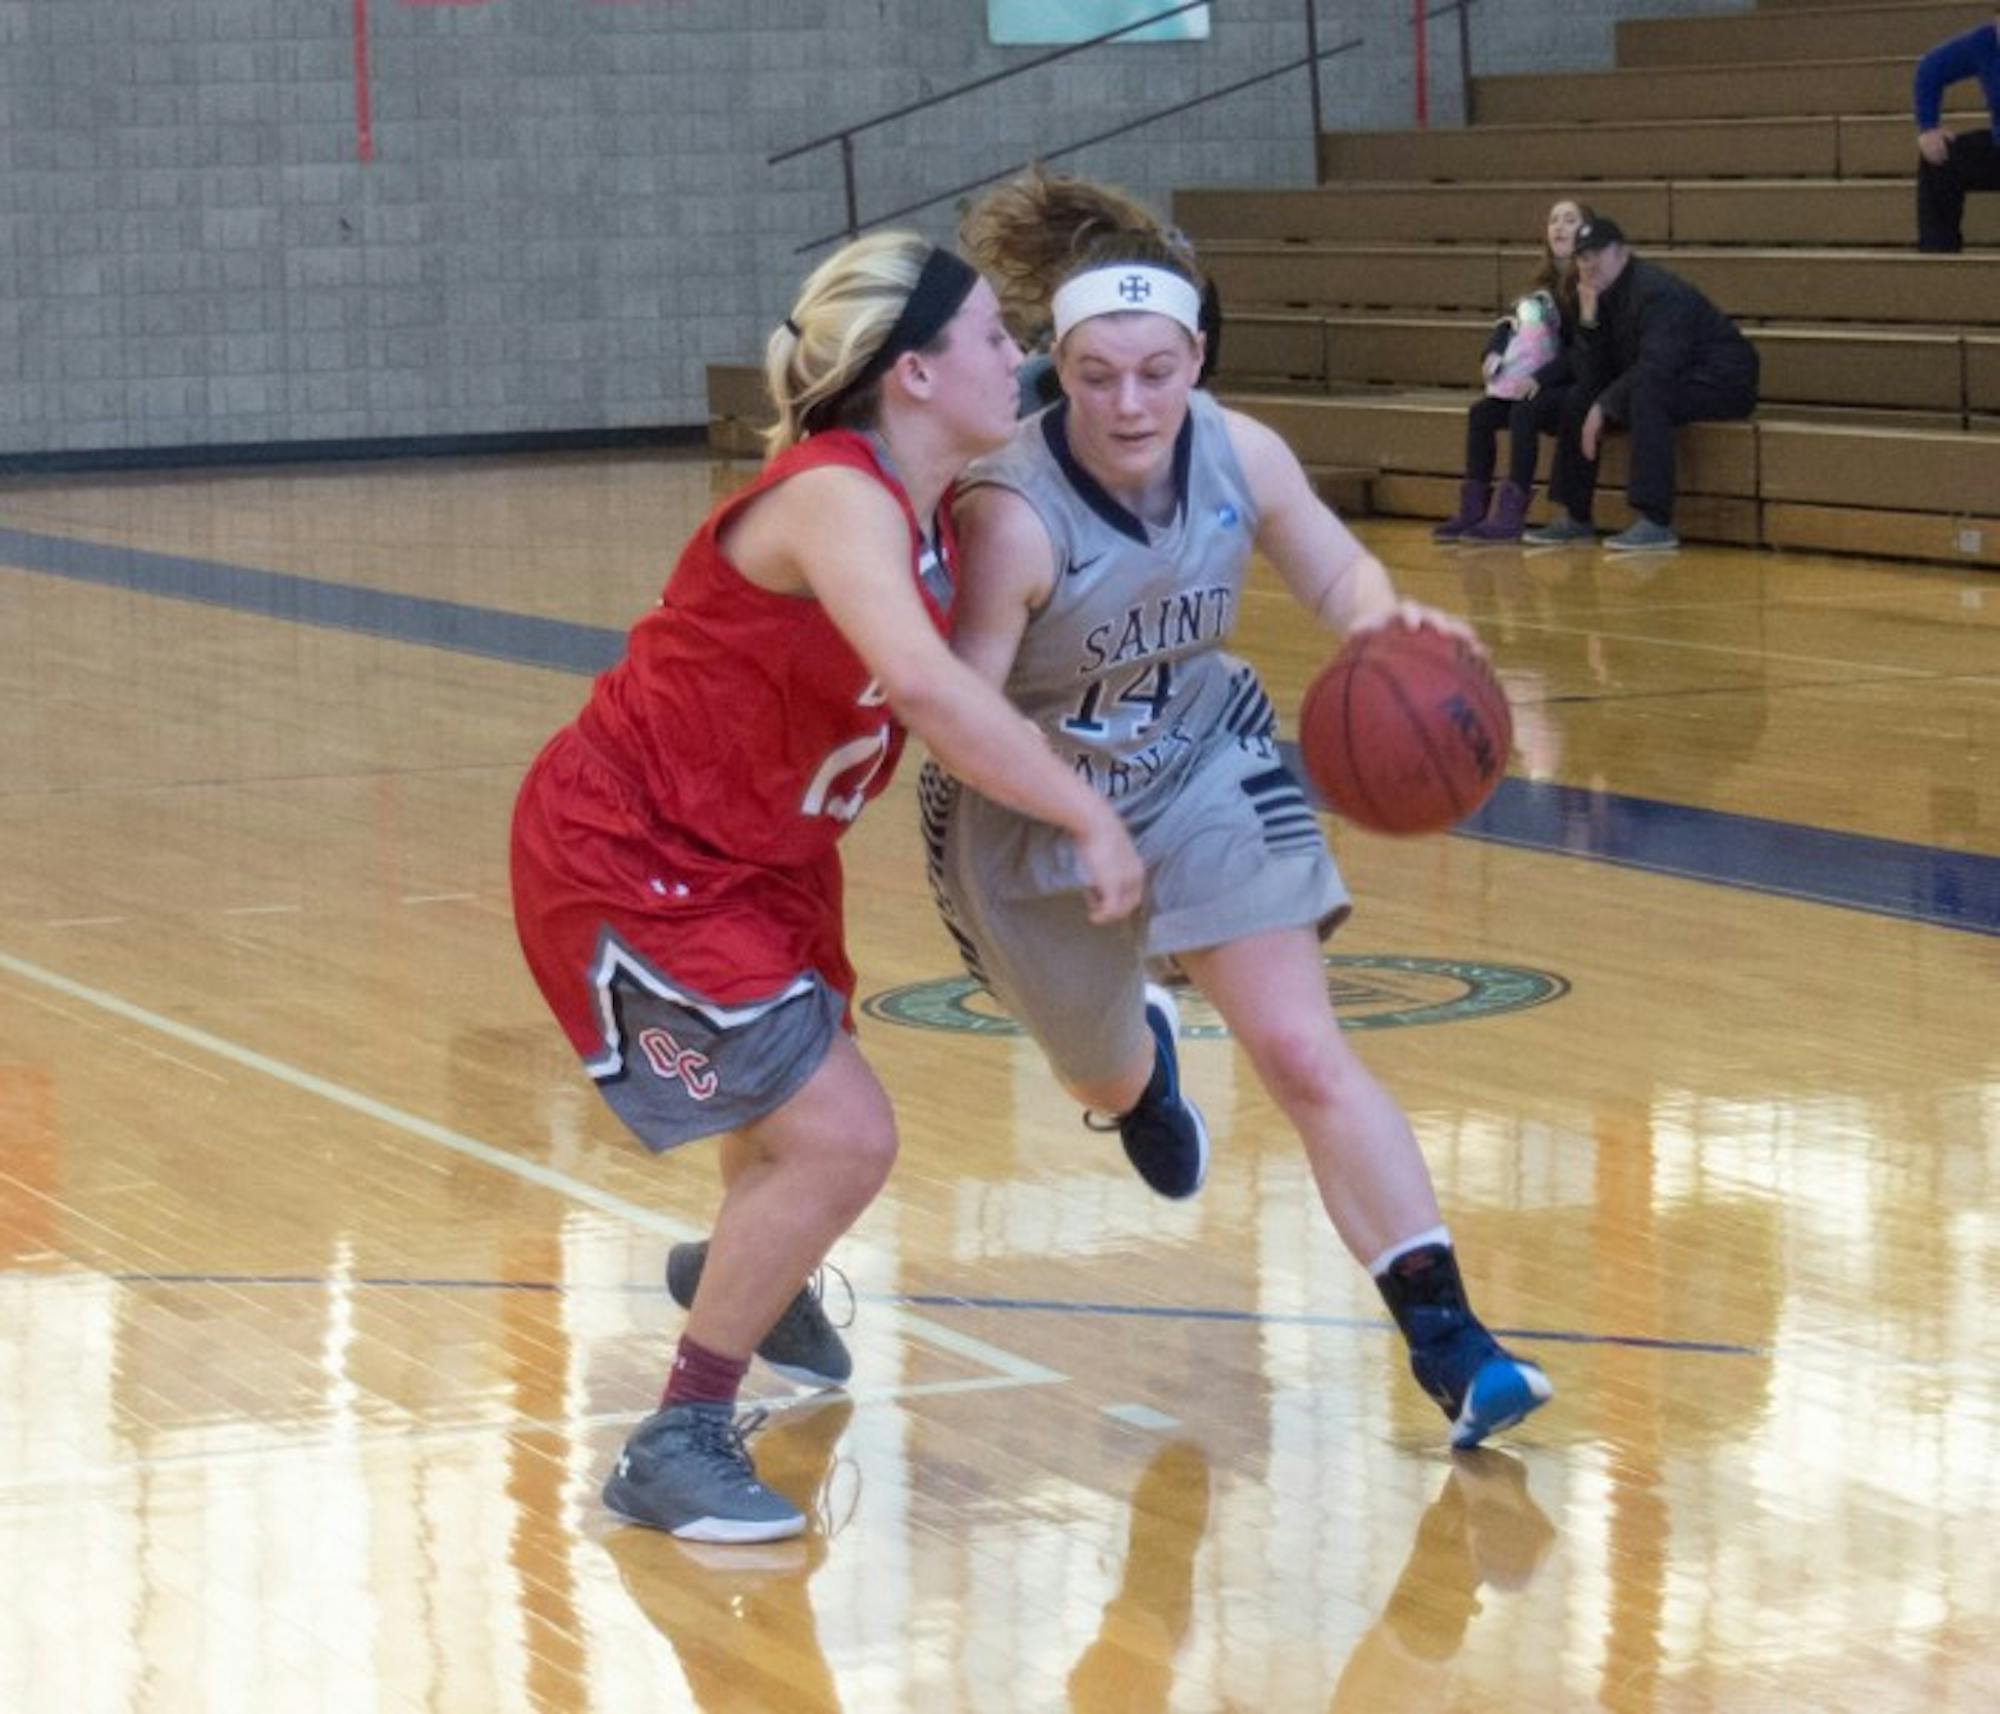 Saint Mary’s freshman guard Erin Maloney attempts to drive past a defender during a 52-49 loss to Olivet on Jan. 23 at Angela Gym. Maloney had six points and four rebounds in the game.